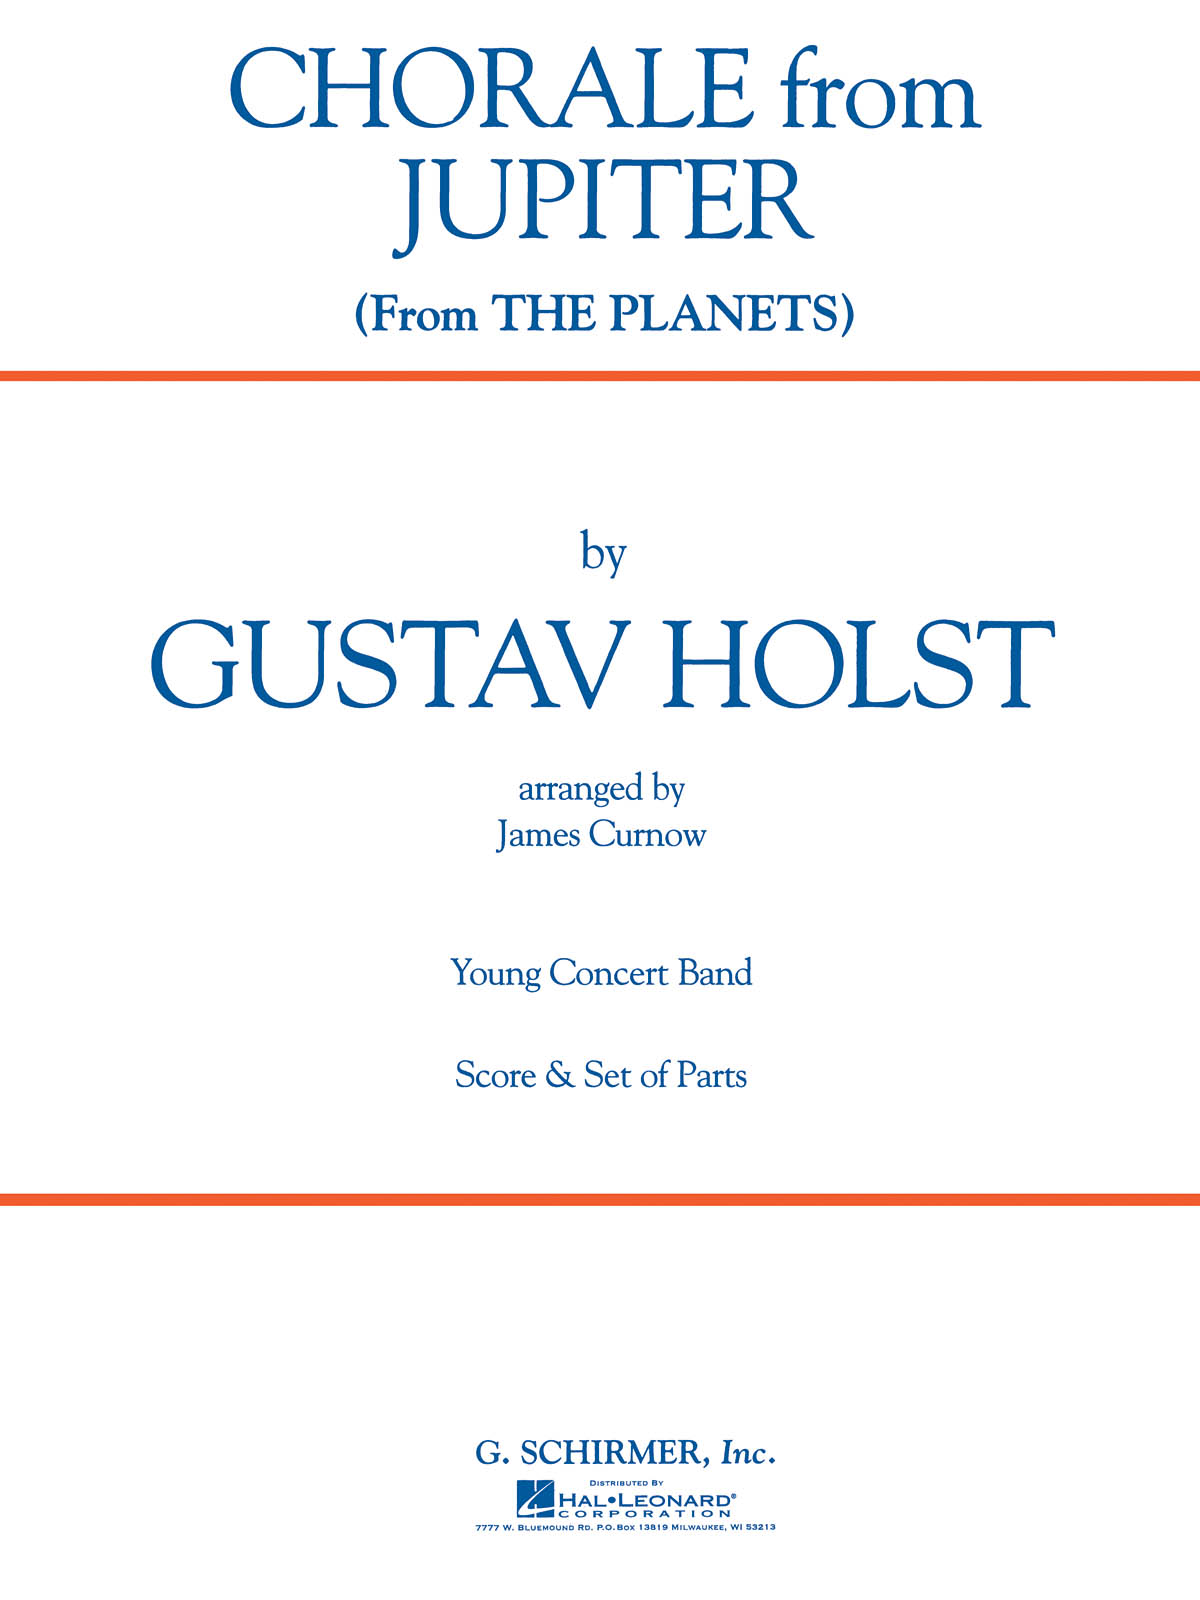 Gustav Holst: Chorale from Jupiter (from The Planets): Concert Band: Score &